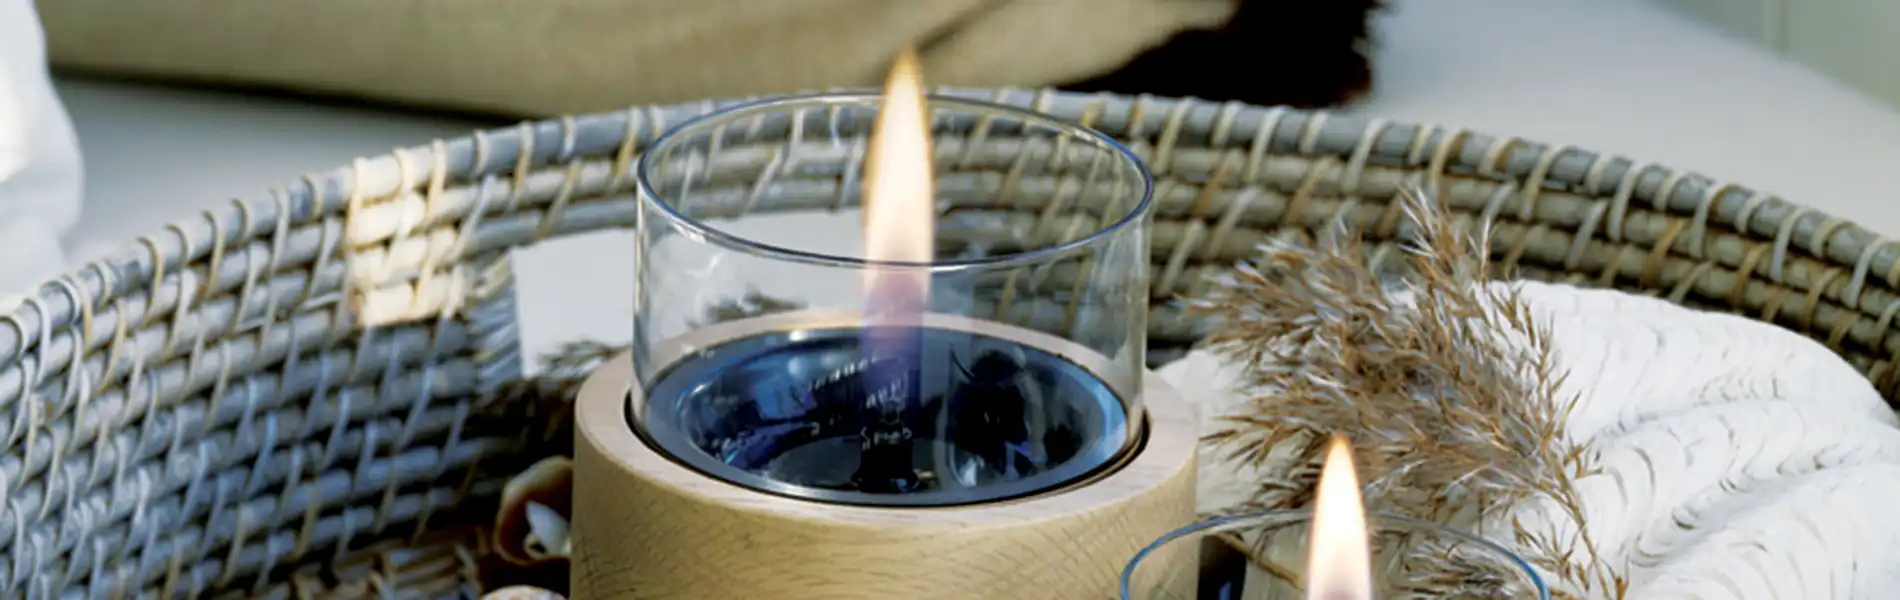 Tenderflame candle outdoors in a basket